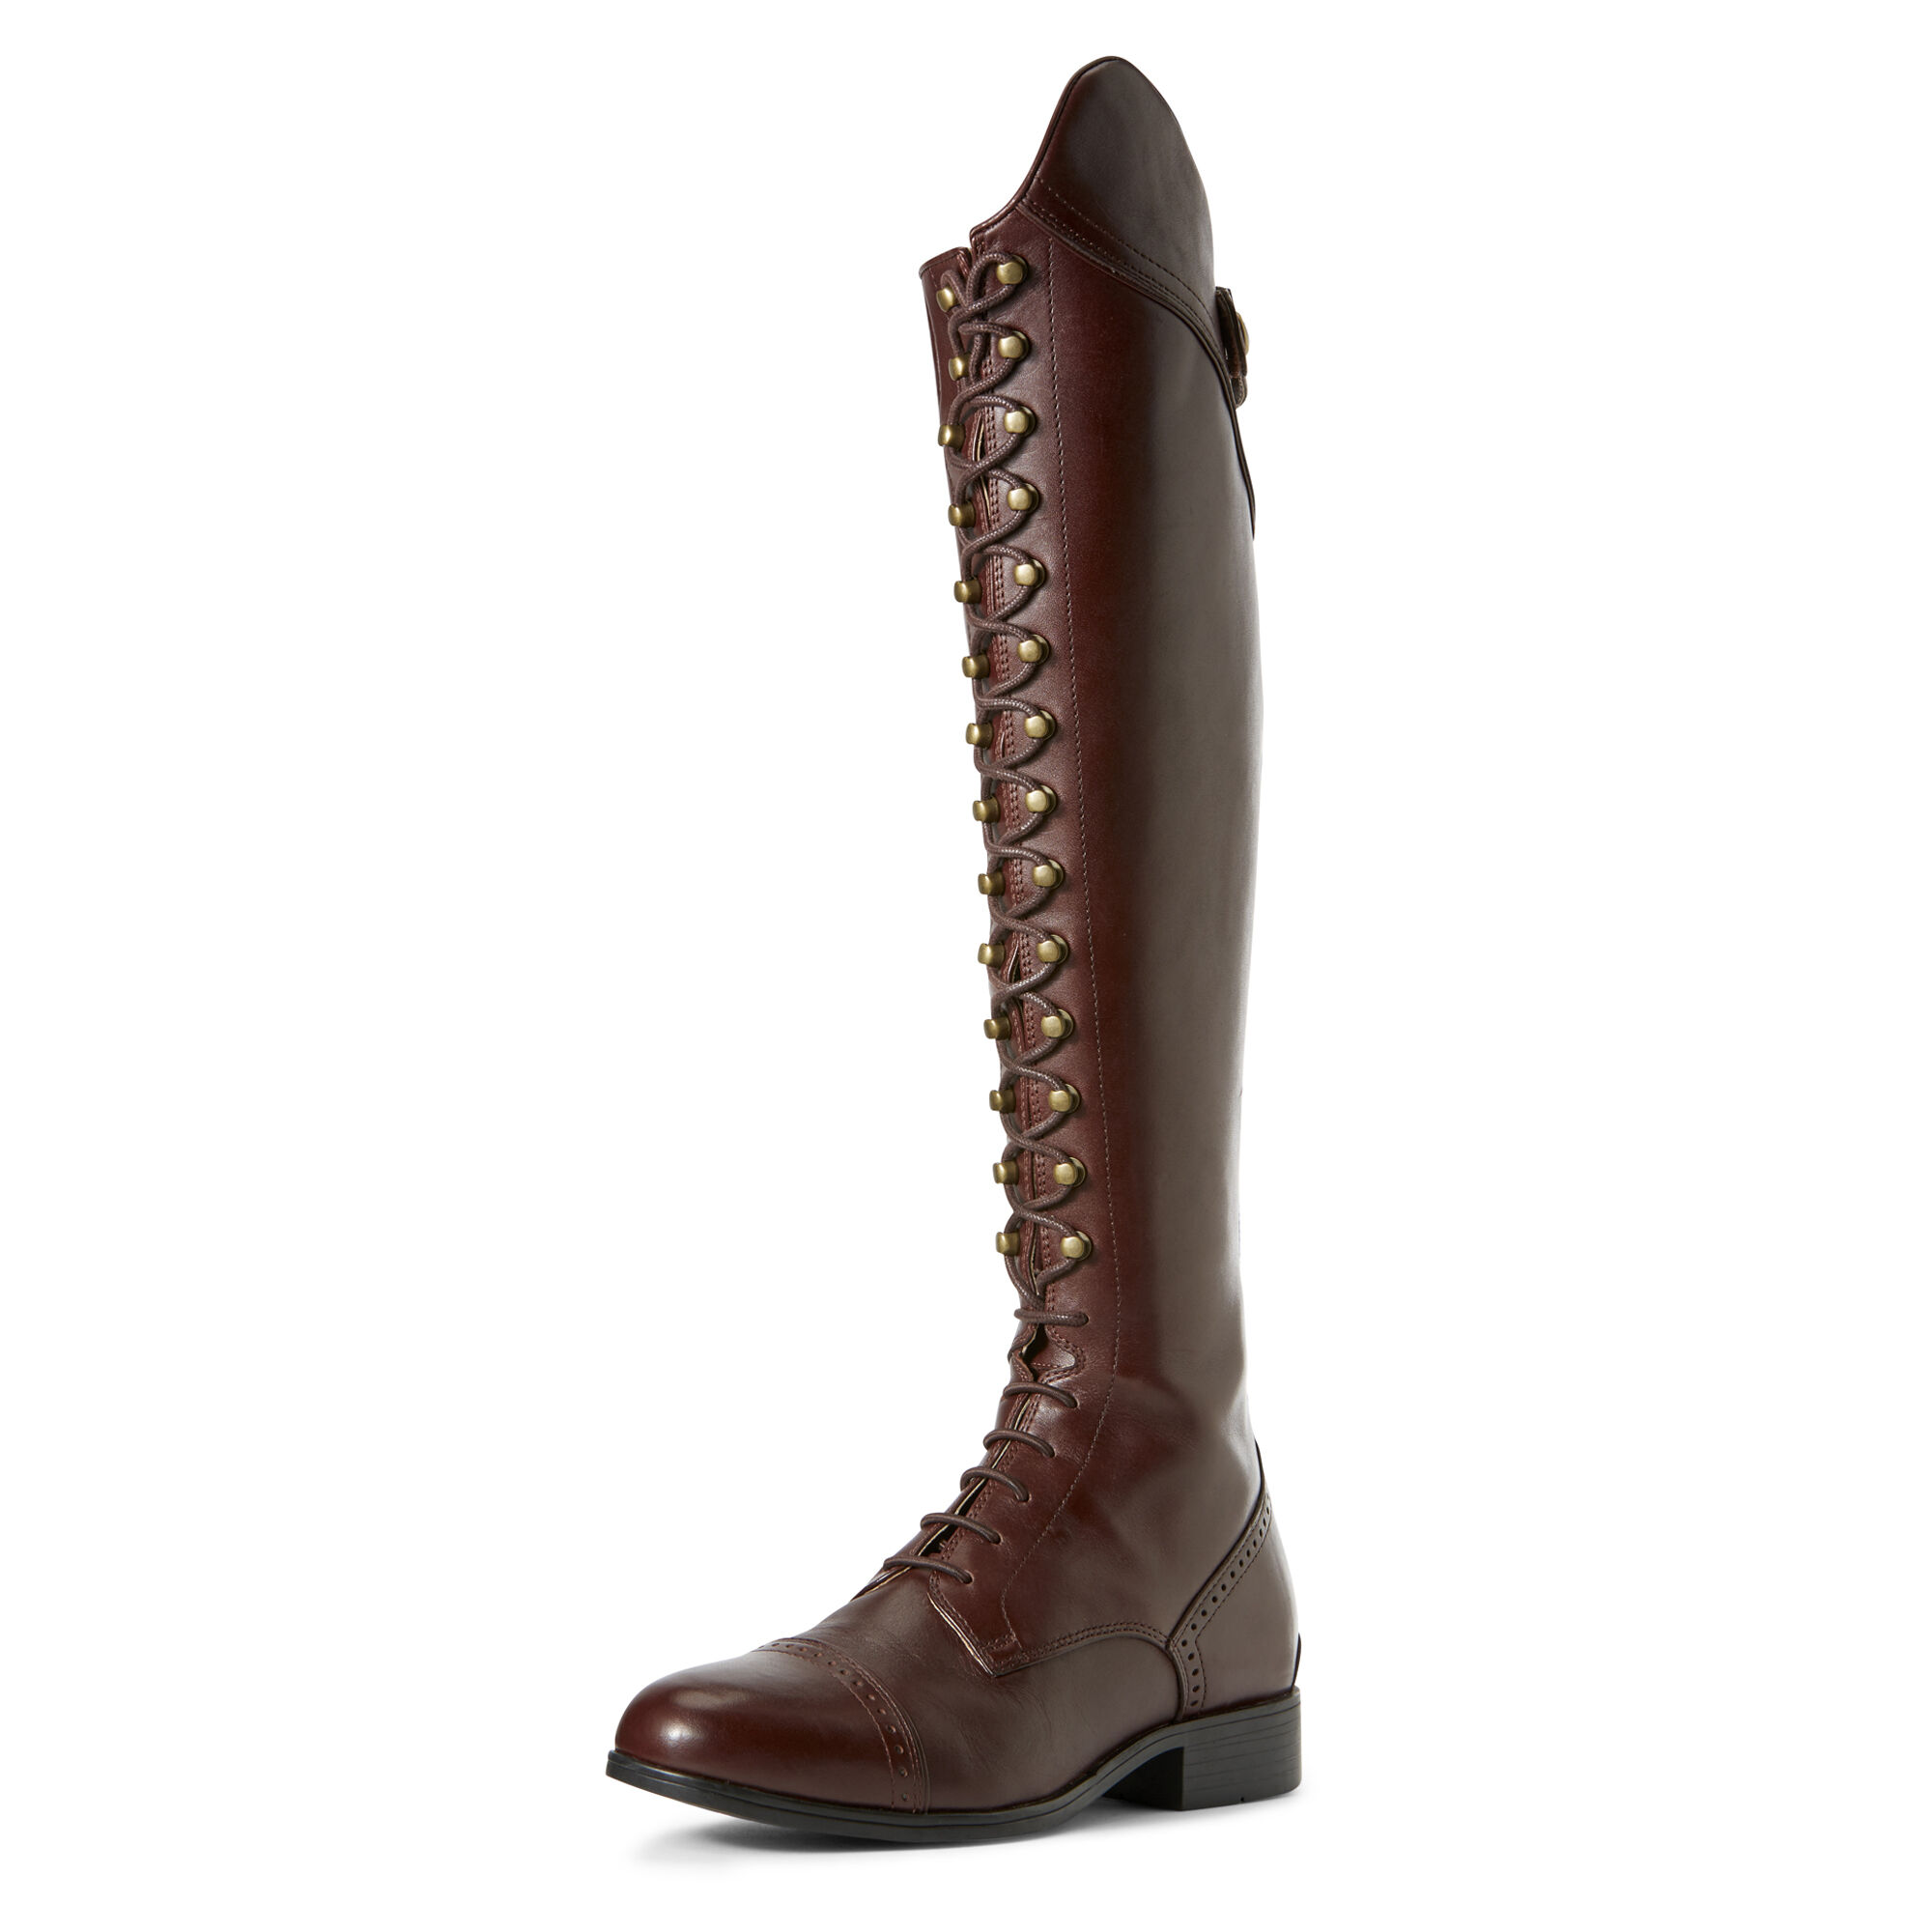 Women's Capriole Tall Riding Boots in Mahogany Leather  Full by Ariat